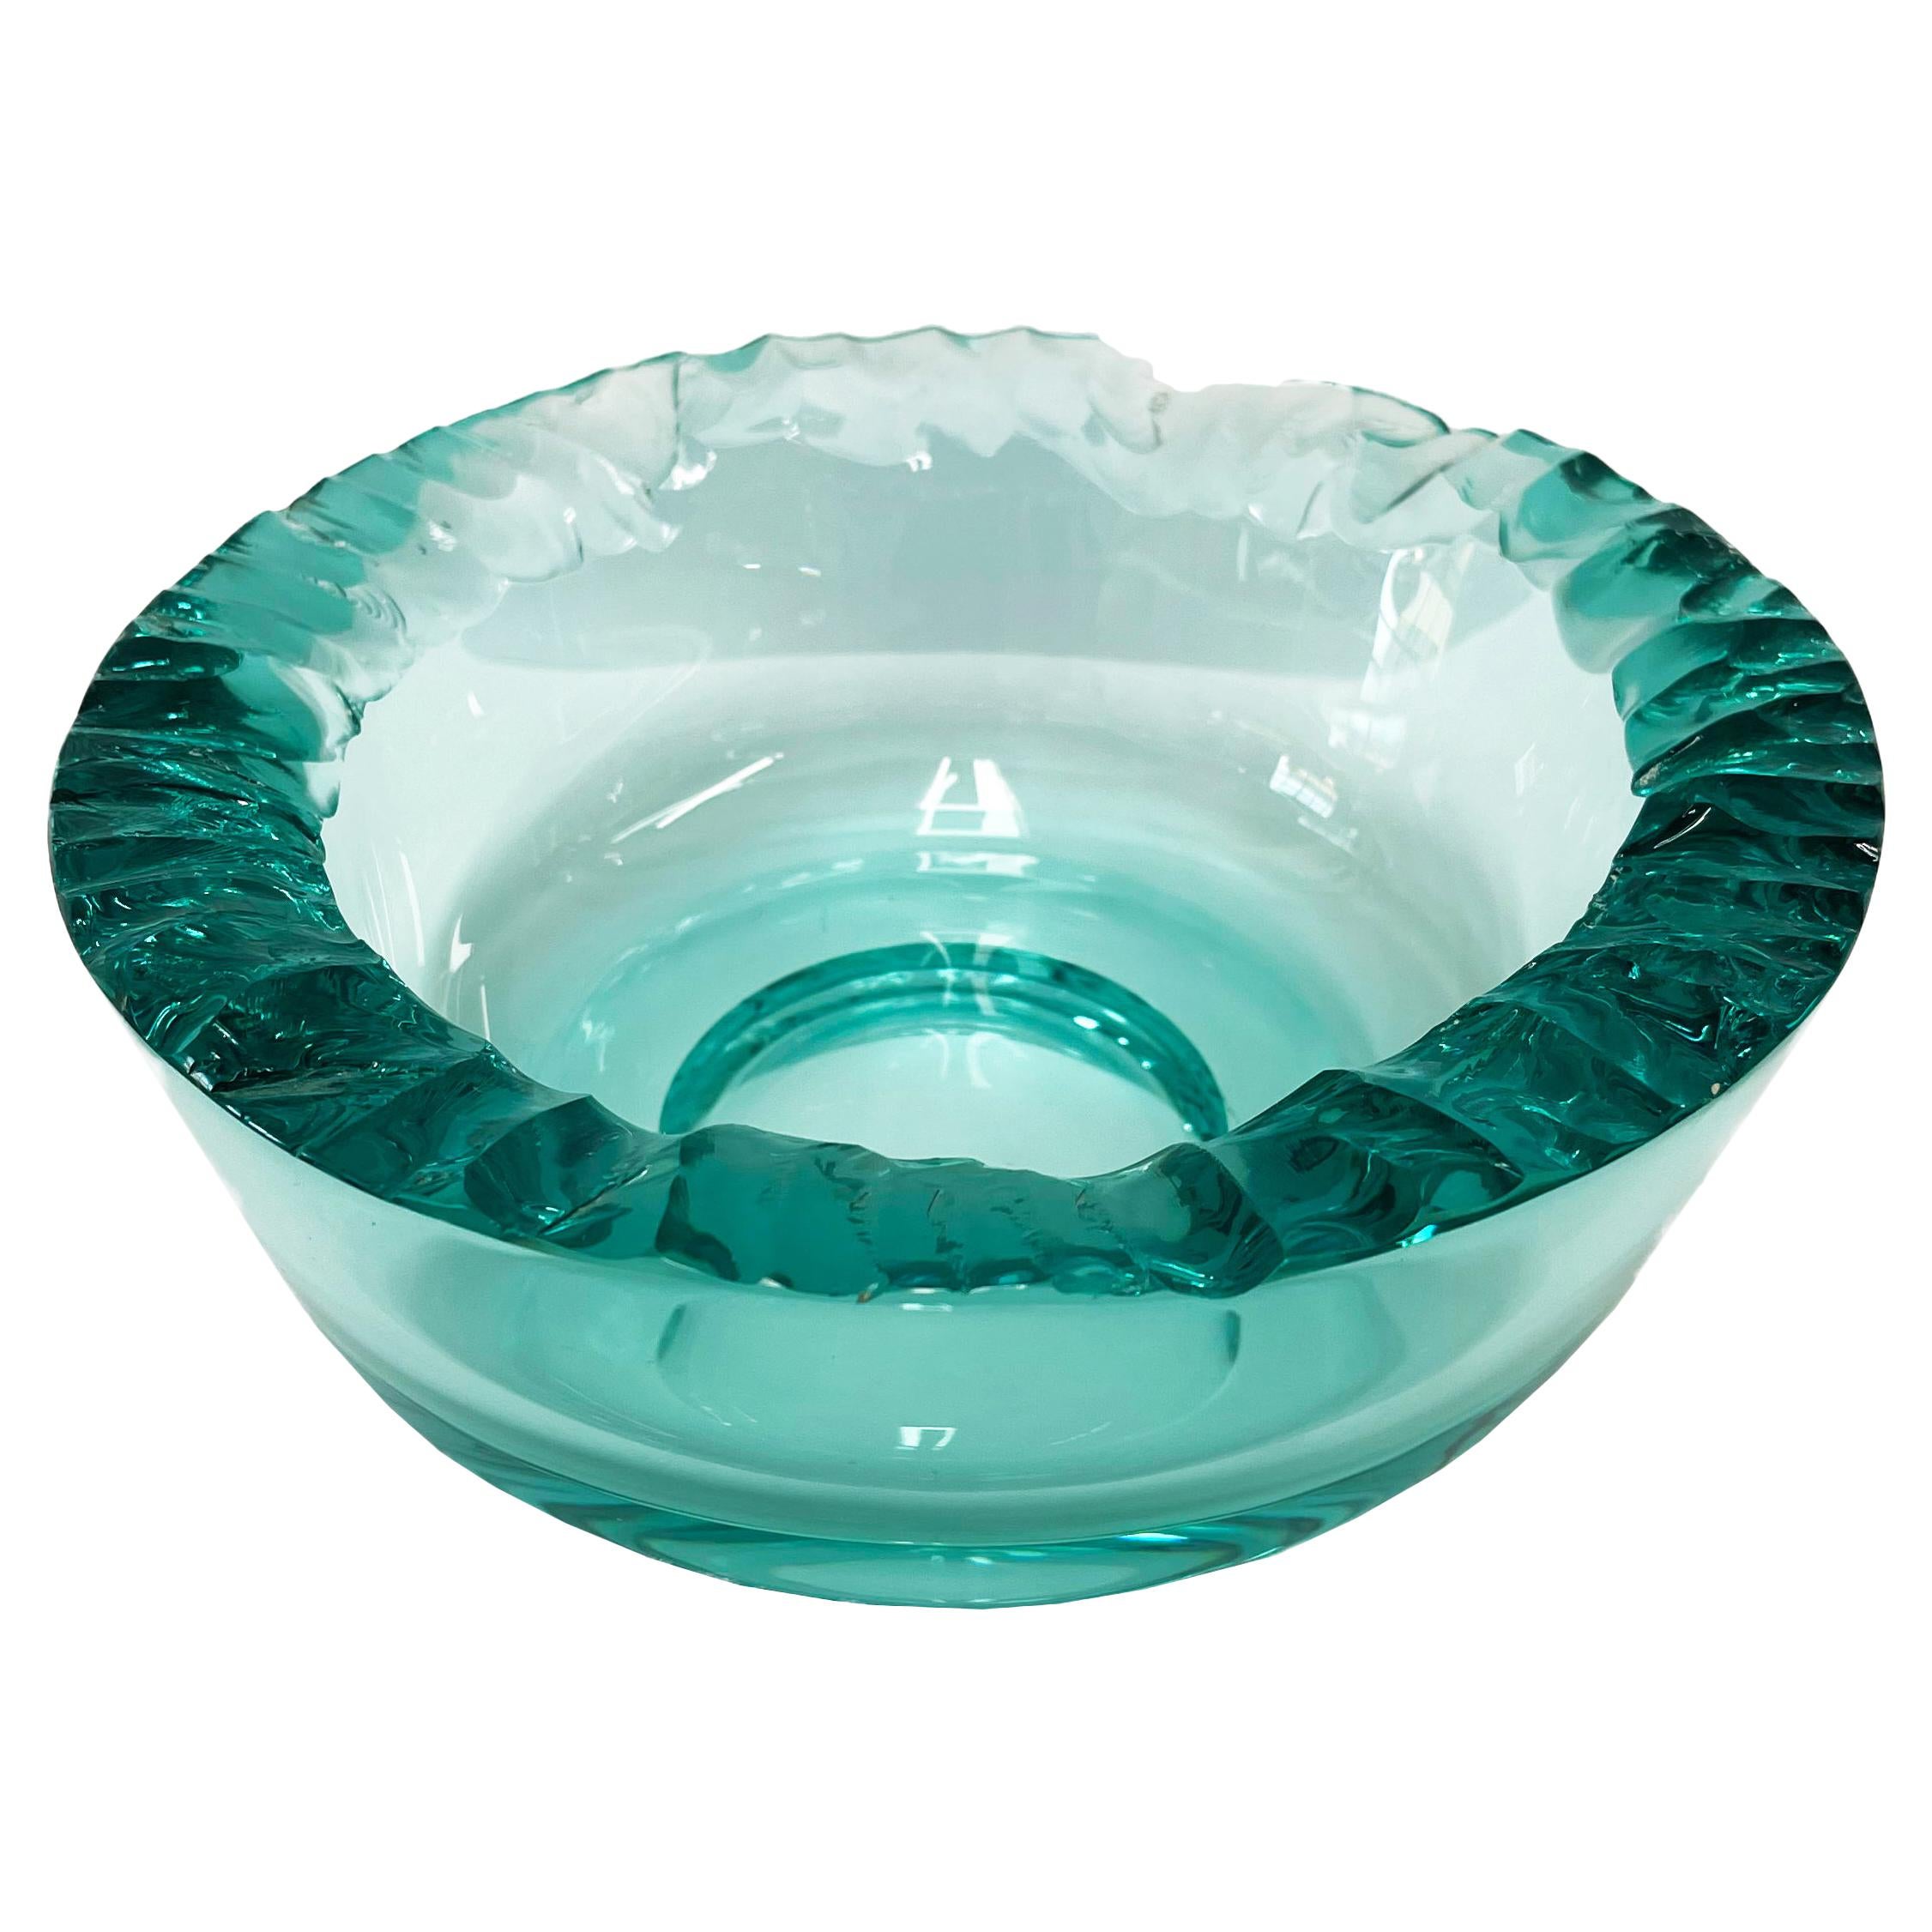 Contemporary Artistic Bowl Hand Crafted Aquamarine Crystal by Ghirò Studio